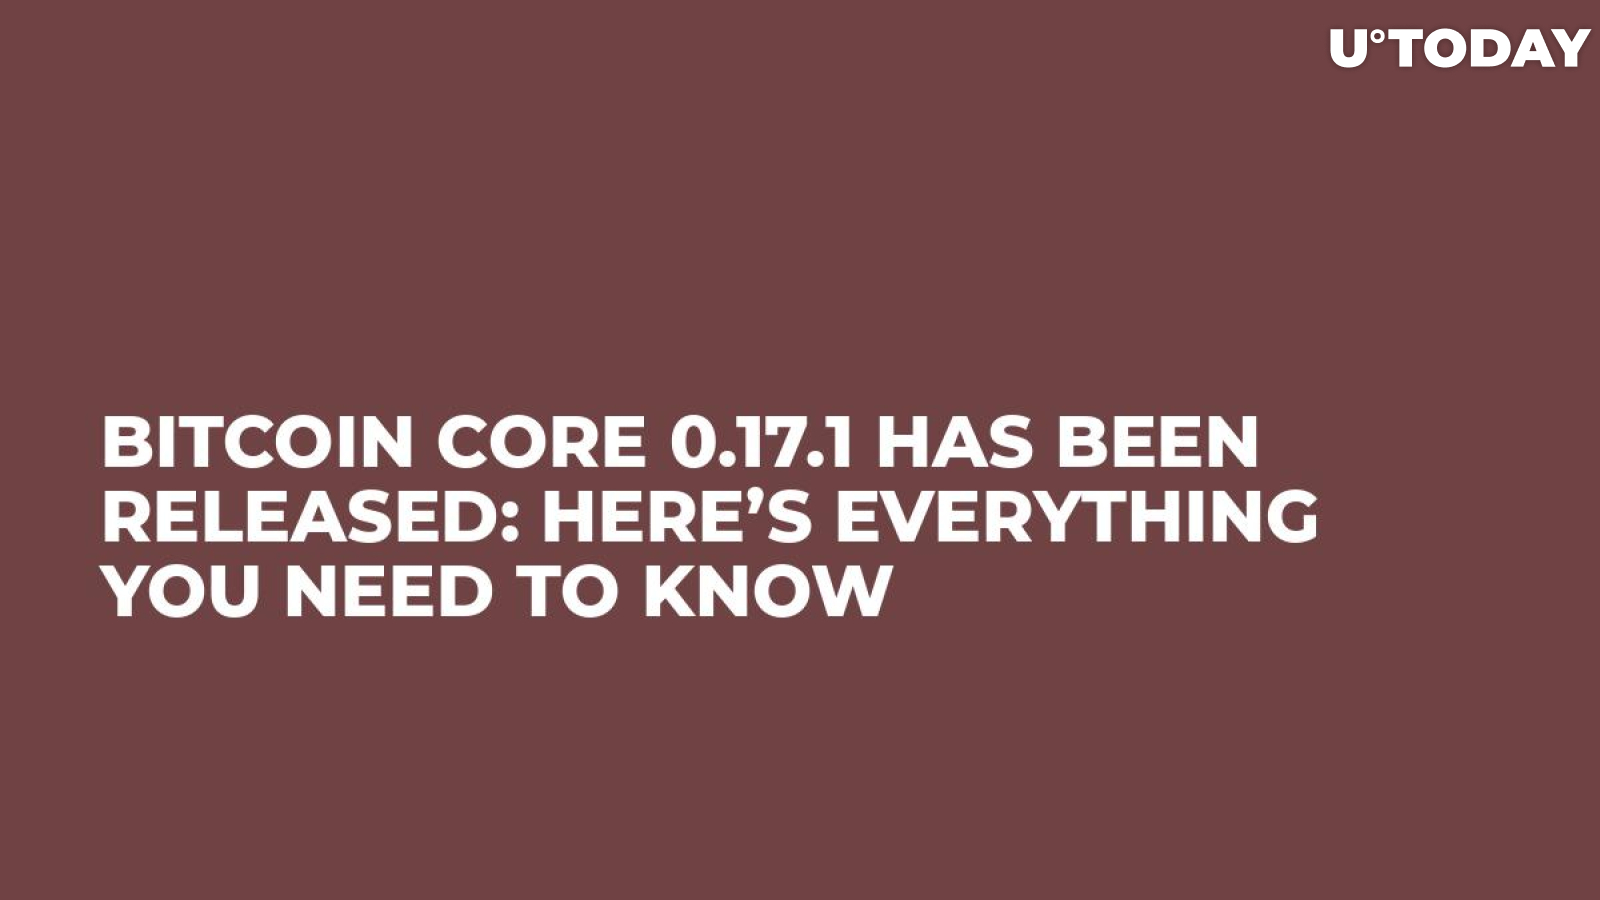 Bitcoin Core 0.17.1 Has Been Released: Here’s Everything You Need to Know